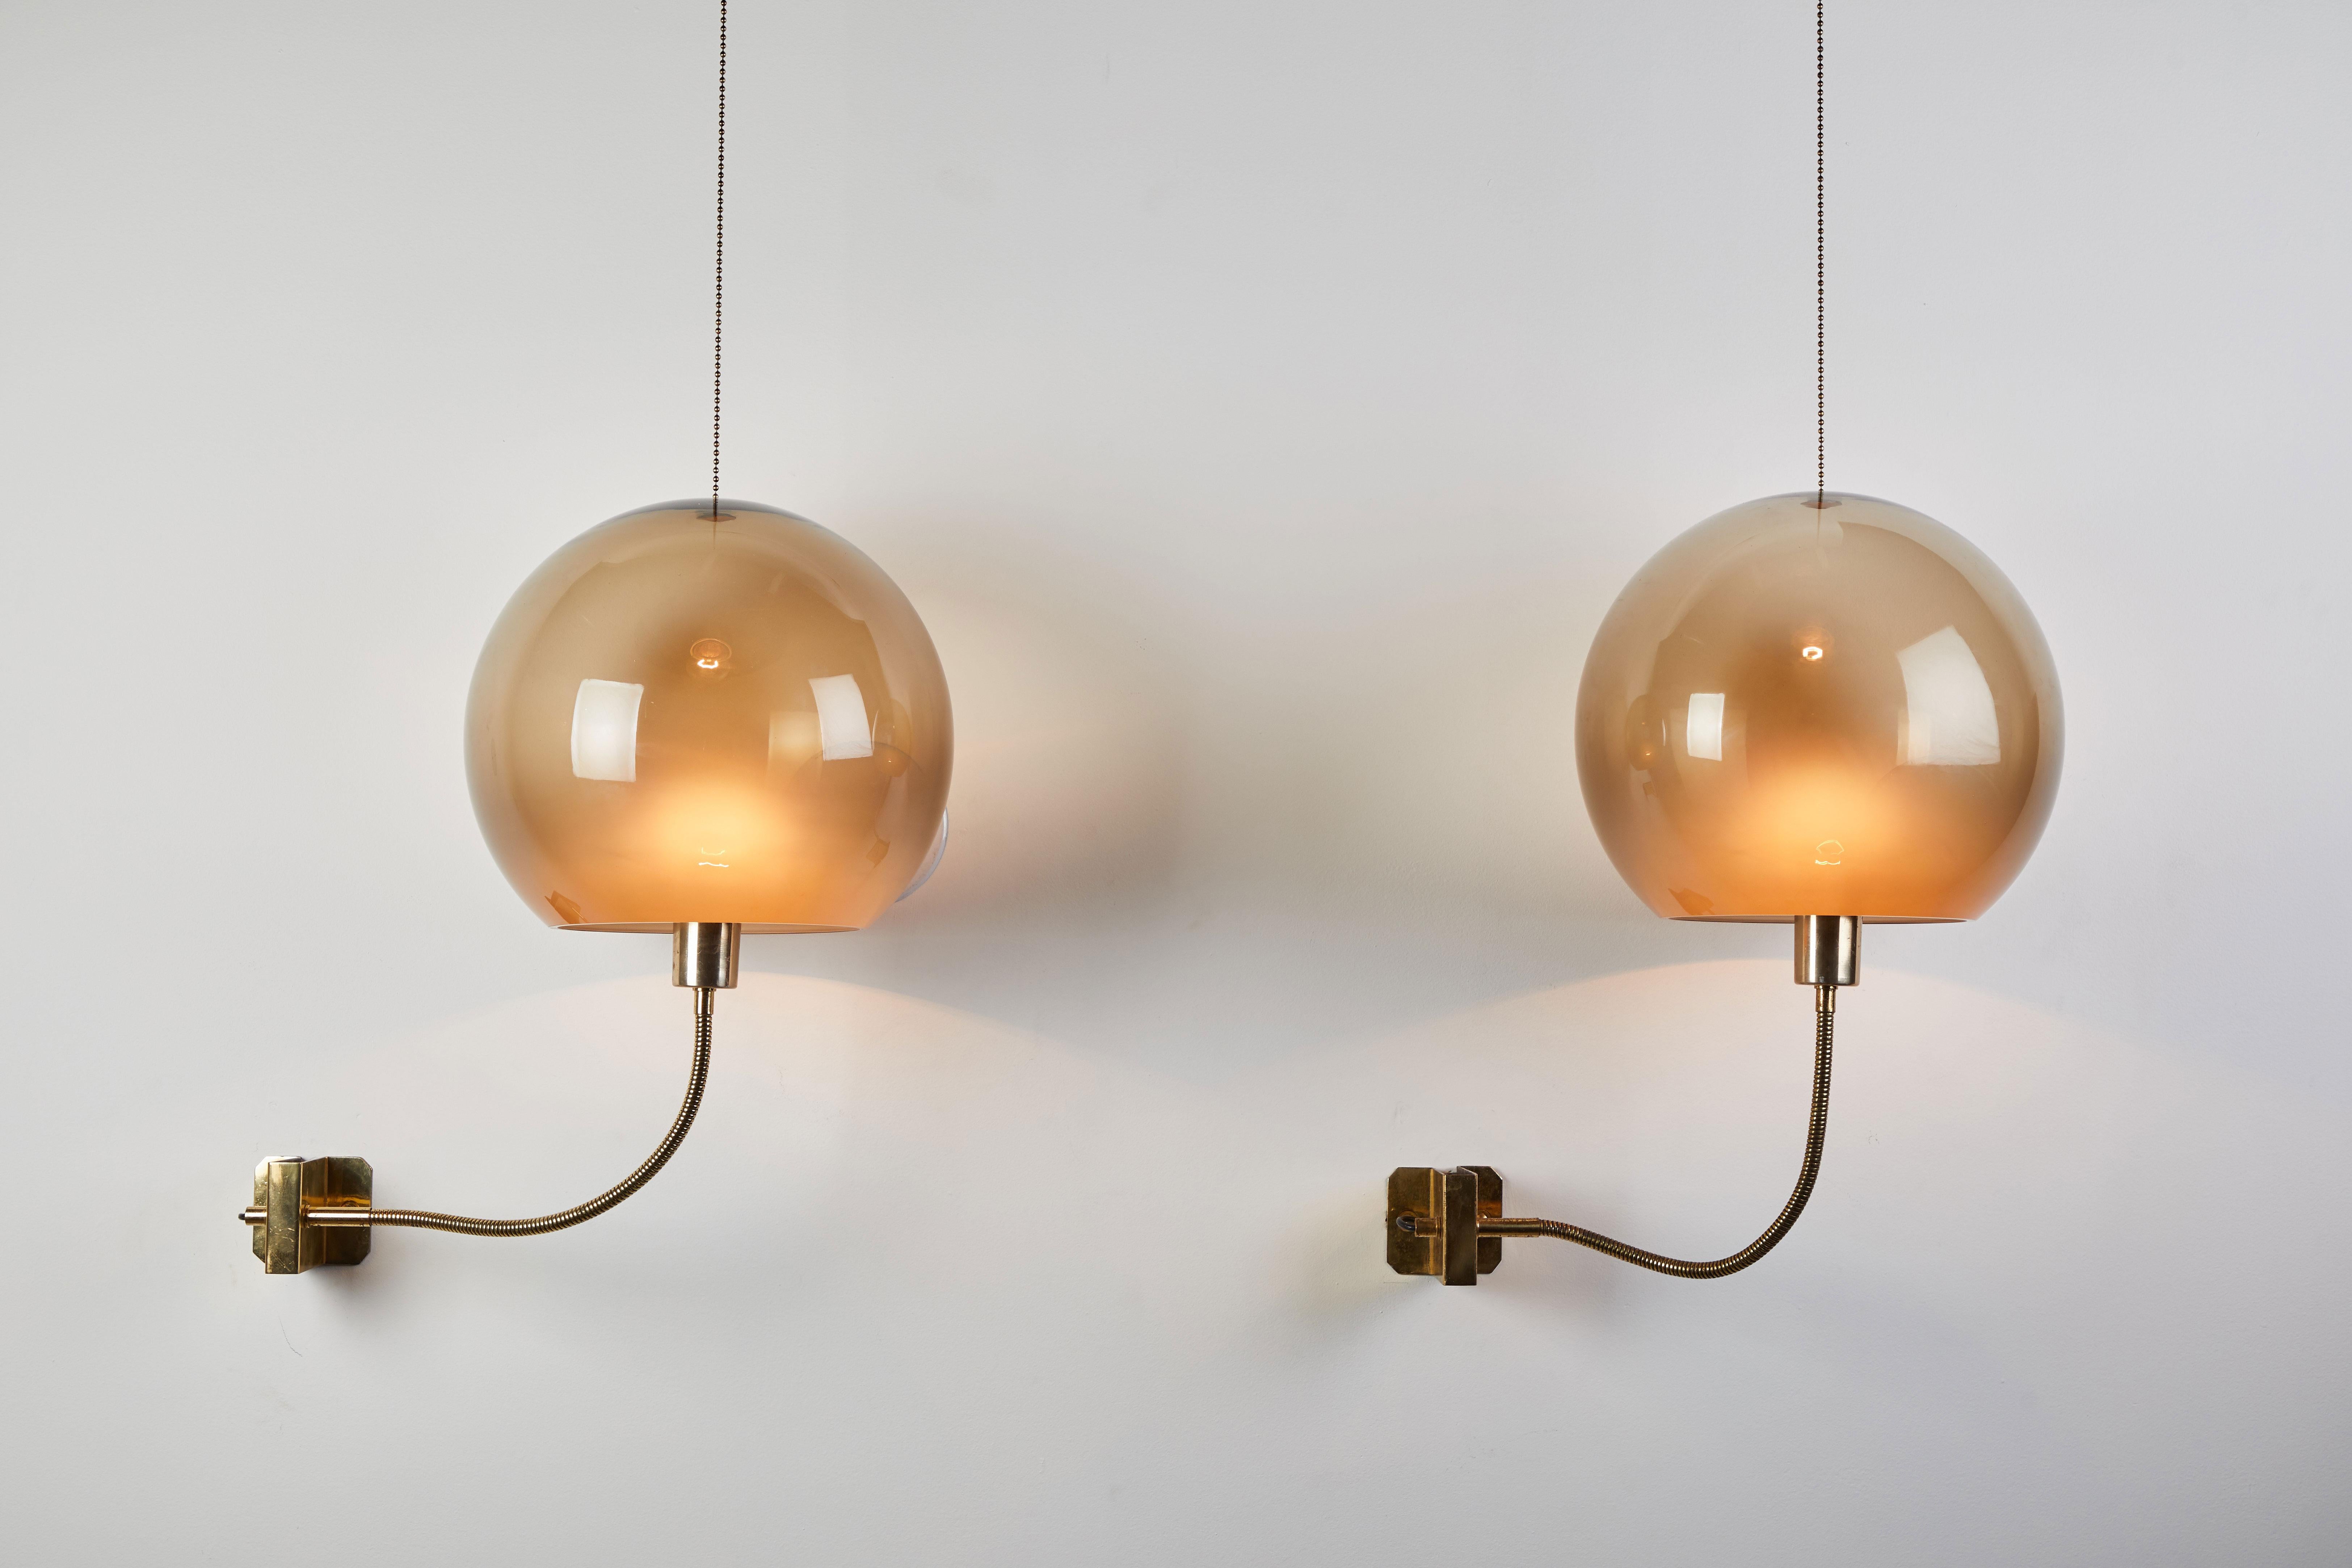 Two rare and important model 244 sconces by Ico Parisi for Arteluce. Designed and manufactured in Italy circa 1960. Brass and glass. Wired for US junction boxes. This ingenious design allows light source to be directed on a flexible arm or diffused